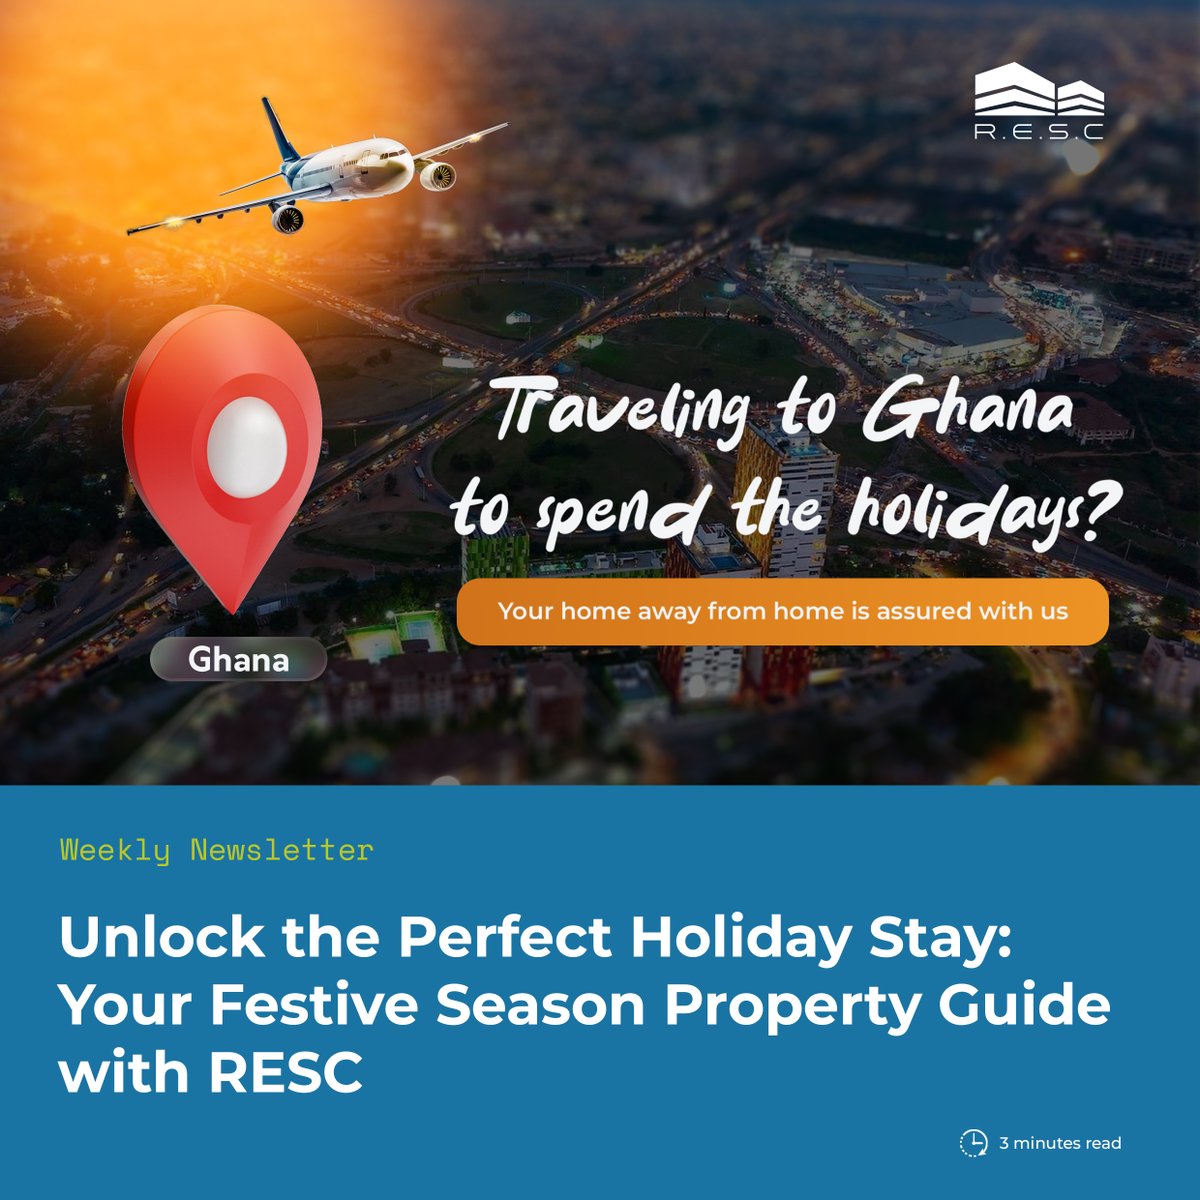 🌟 Unlock the Perfect Holiday Stay with RESC! 🎄 Explore our 'Festive Season Property Guide' for the best properties to rent this December. Your holiday experience starts here! 🏡✨ Visit our website: rescgh.com/view_all_prope… to find your dream holiday rental.#HolidayRentals #RESC